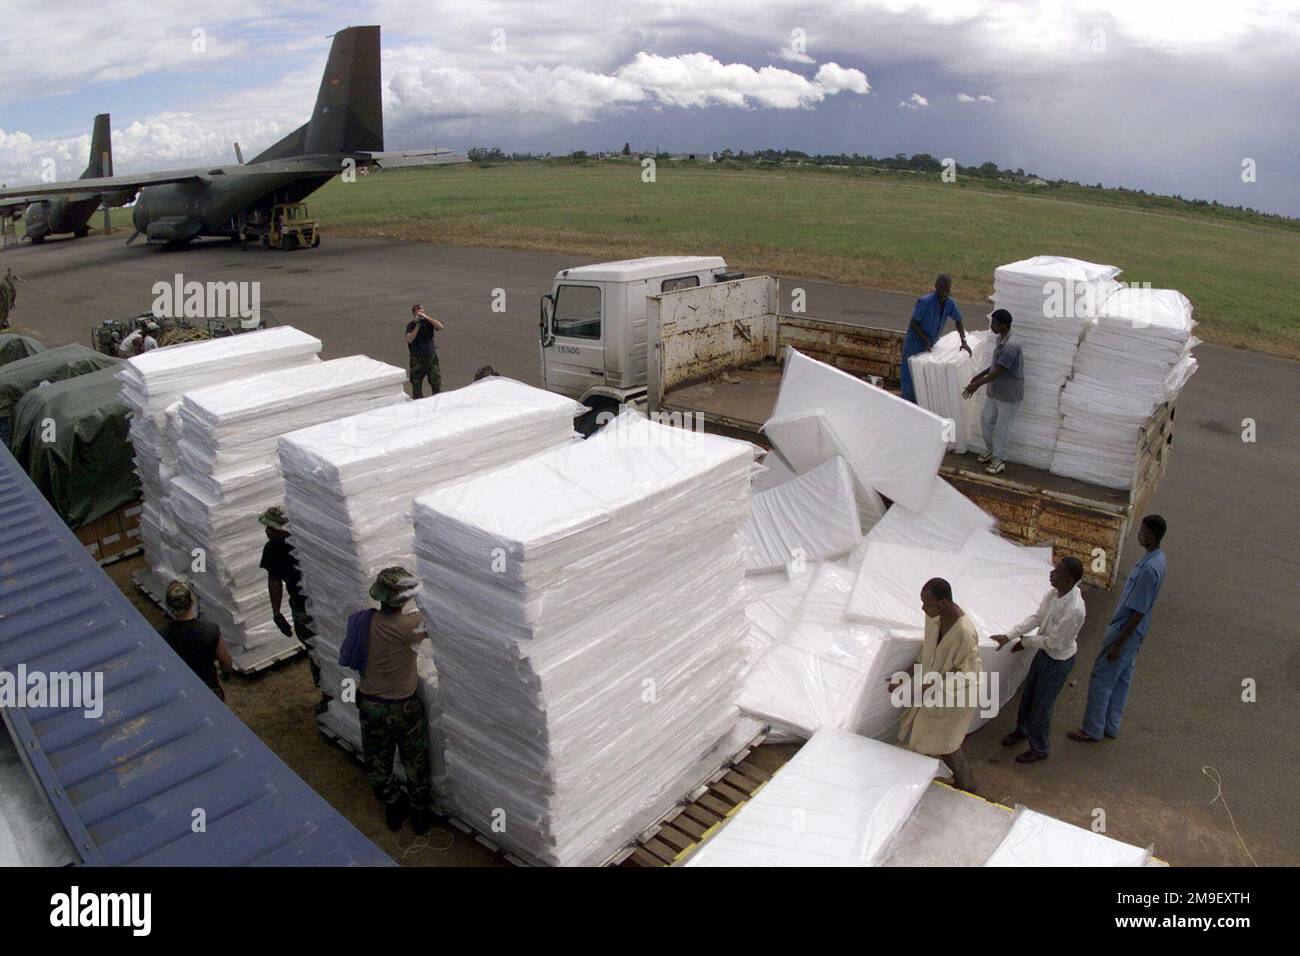 A medium shot from a high angle looking down as US Air Force members of the 86th Air Mobility Squadron, Ramstein Air Base, Germany, with help from local Laborers, build pallets of bedding material to be transported to various locations in Mozambique at the International Airport at Maputo, Mozambique, Africa on 16 March 2000. They and their team are deployed here in support of Operation Atlas Response, a Humanitarian Aid Operation to help the people of Mozambique, after severe flooding (flooding and victims not shown) displaced over a million people from their homes. Subject Operation/Series: A Stock Photo